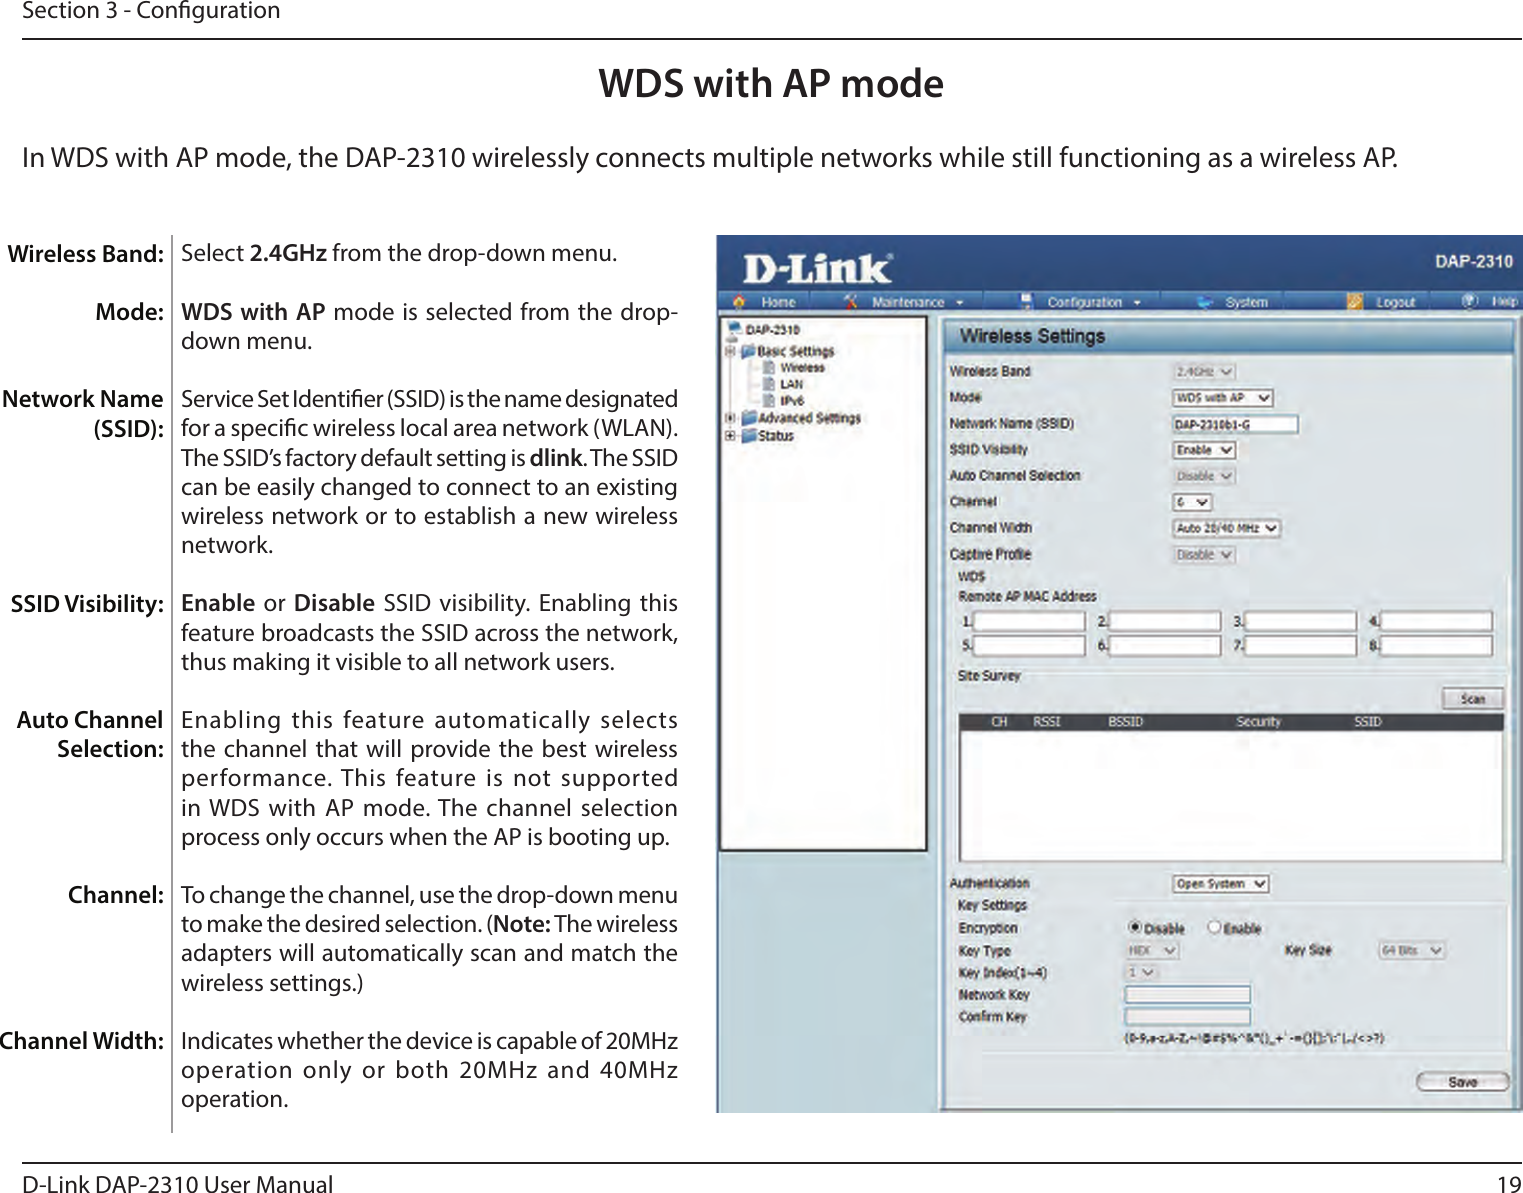 19D-Link DAP-2310 User ManualSection 3 - CongurationWDS with AP mode Select 2.4GHz from the drop-down menu. WDS with AP mode is selected from the drop-down menu.Service Set Identier (SSID) is the name designated for a specic wireless local area network (WLAN). The SSID’s factory default setting is dlink. The SSID can be easily changed to connect to an existing wireless network or to establish a new wireless network.Enable or Disable SSID visibility. Enabling this feature broadcasts the SSID across the network, thus making it visible to all network users.Enabling this feature automatically selects the channel that will provide the best  wireless performance. This feature is  not supported in WDS with AP  mode. The channel selection process only occurs when the AP is booting up.To change the channel, use the drop-down menu to make the desired selection. (Note: The wireless adapters will automatically scan and match the wireless settings.)      Indicates whether the device is capable of 20MHz operation only  or both 20MHz and 40MHz operation.Wireless Band:Mode:Network Name (SSID):SSID Visibility:Auto Channel Selection:Channel:Channel Width:In WDS with AP mode, the DAP-2310 wirelessly connects multiple networks while still functioning as a wireless AP.